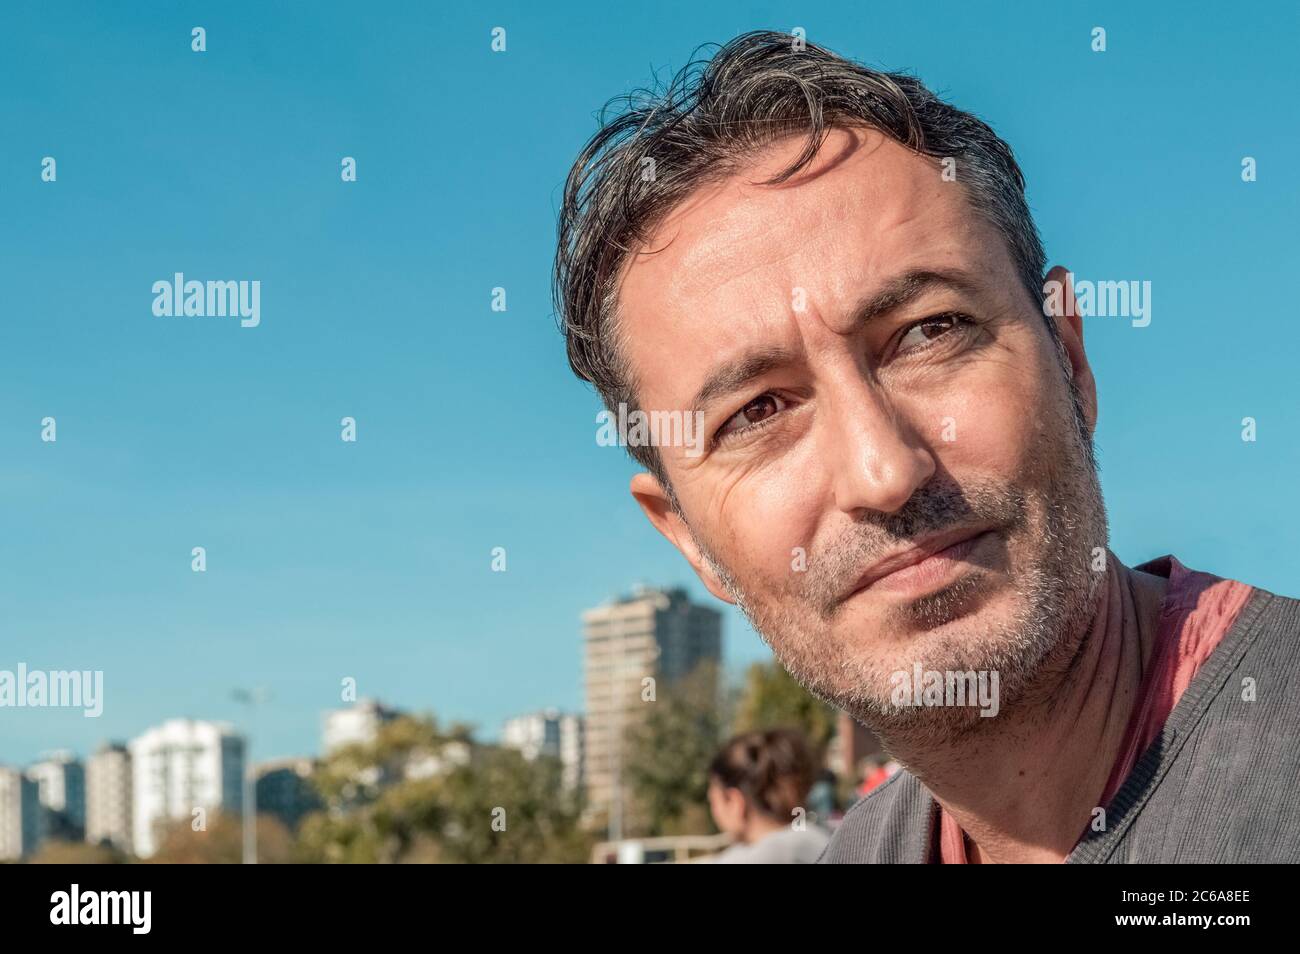 Outdoor portrait of a handsome brunet man at the park with blue sky and urban background. Spending time at the weekend. Emotional expression. Stock Photo